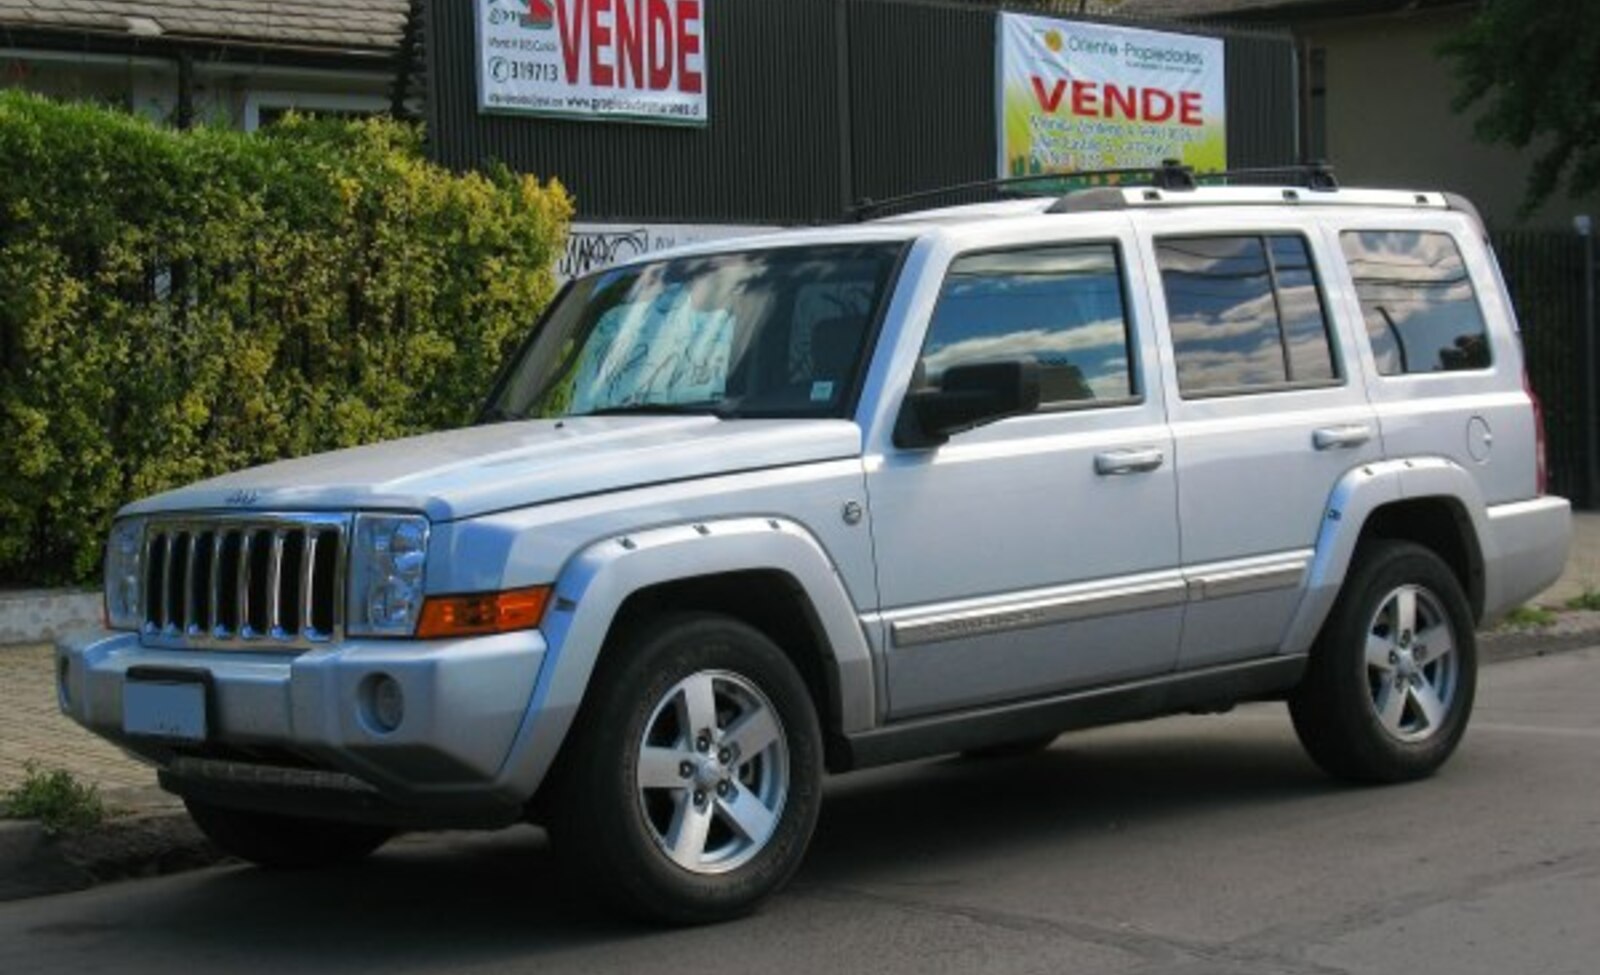 Jeep Commander 5.7 i V8 Limited (334 Hp) 4WD Automatic 2006, 2007, 2008, 2009, 2010